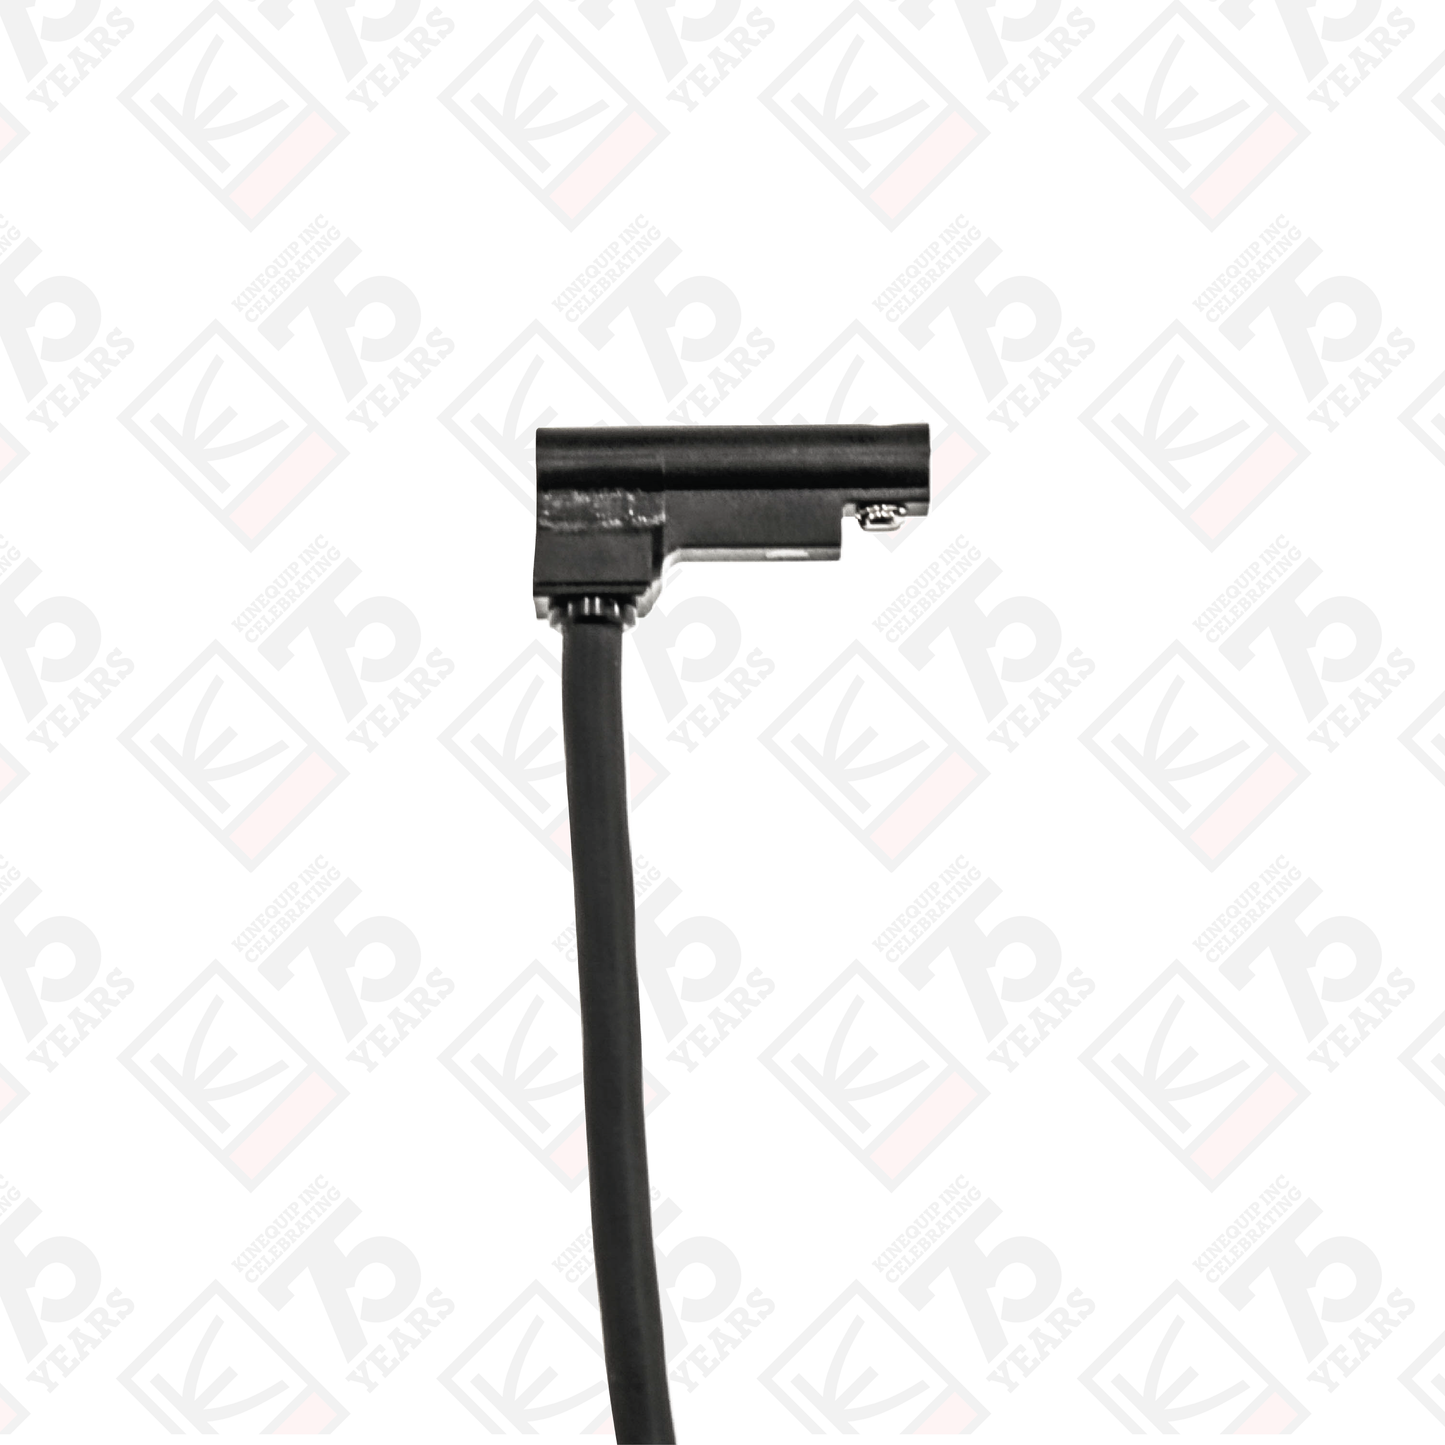 Robohand OHSN-011 | NPN Magneto Resistive Sensor with 90 degree Barrel with Quick Disconnect